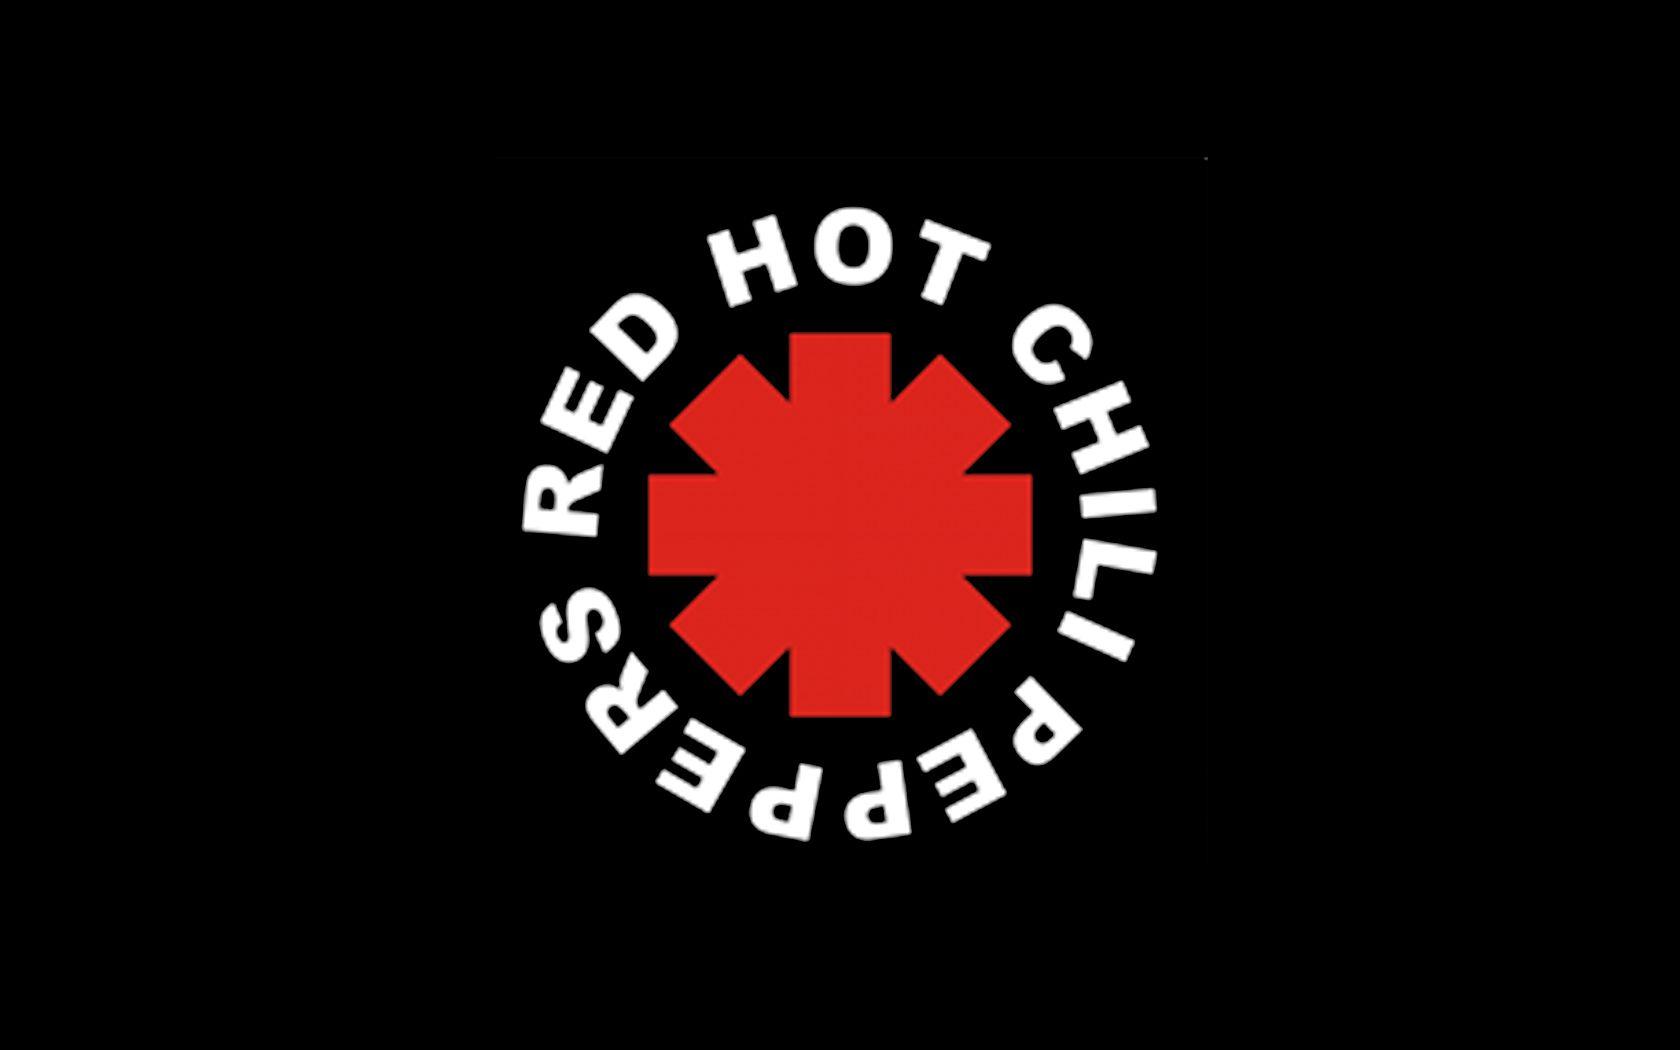 Aggregate more than 78 wallpaper red hot chili peppers super hot - in ...